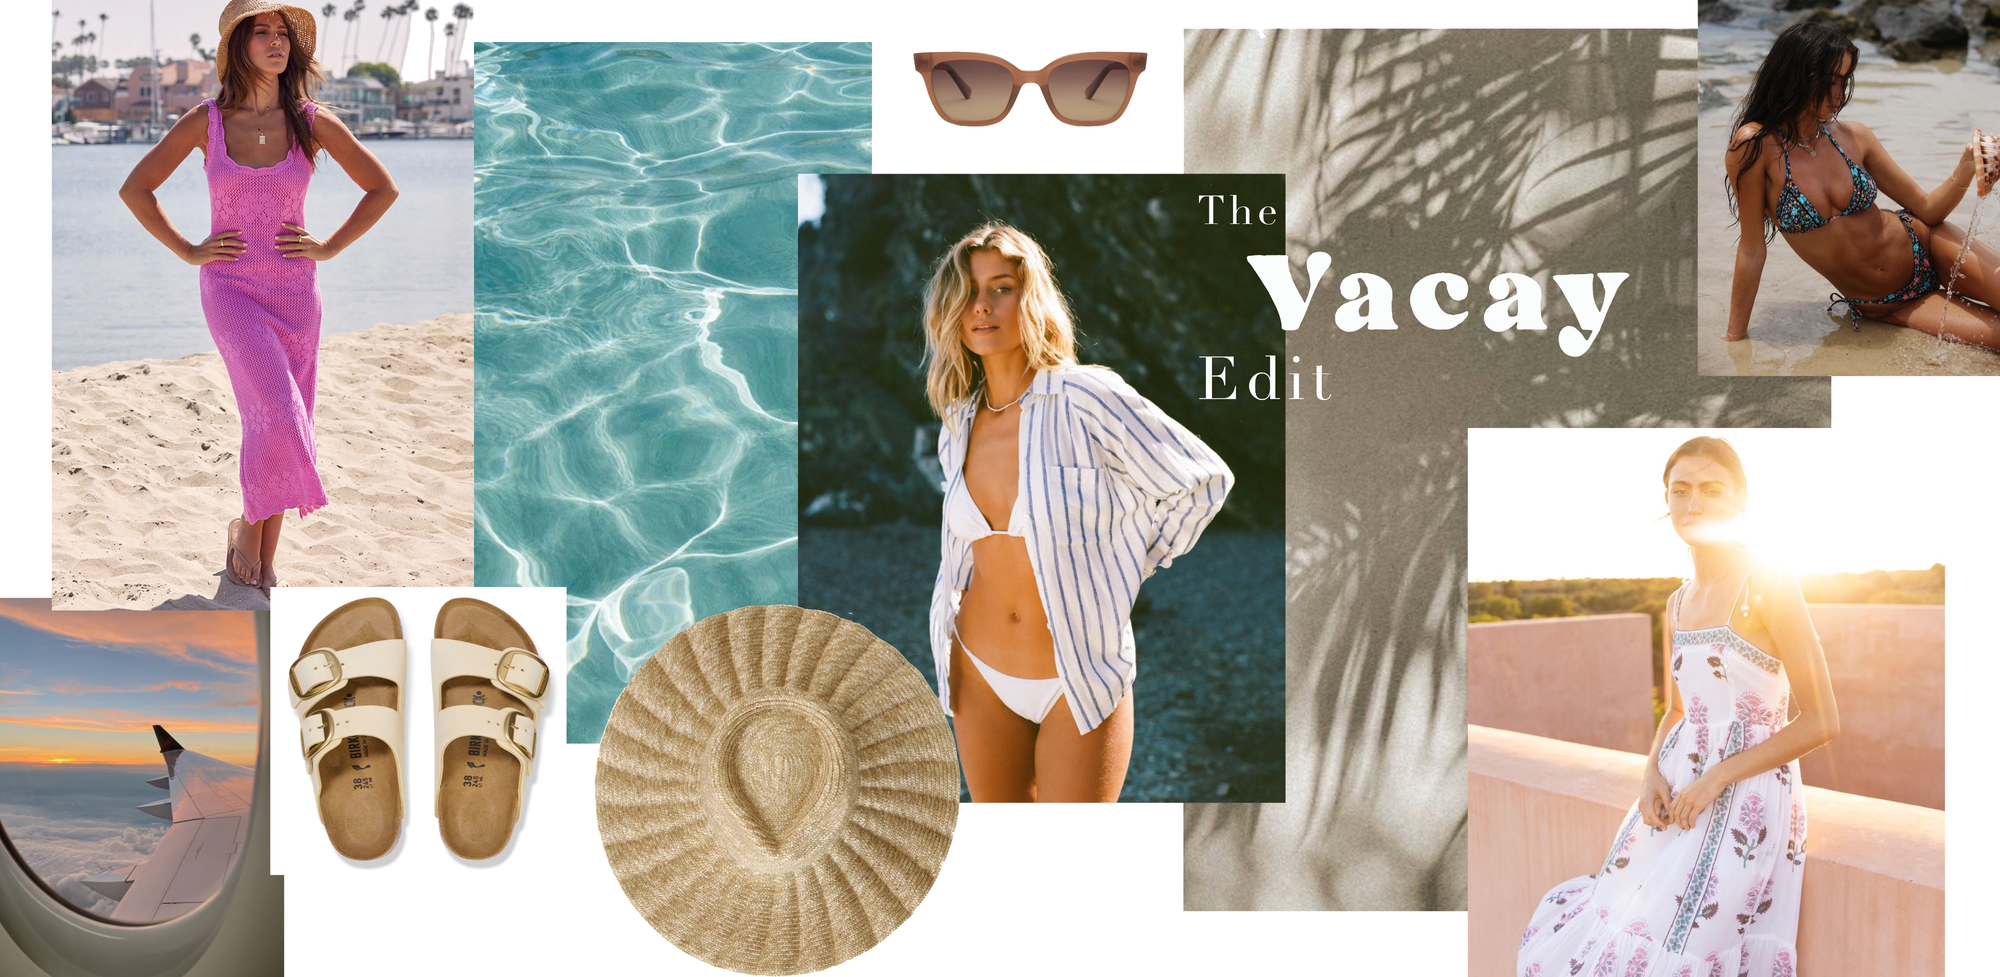 xt The vacay edit - shop all the newest arrivals for your next tropical getaway at waterlilyshop.com